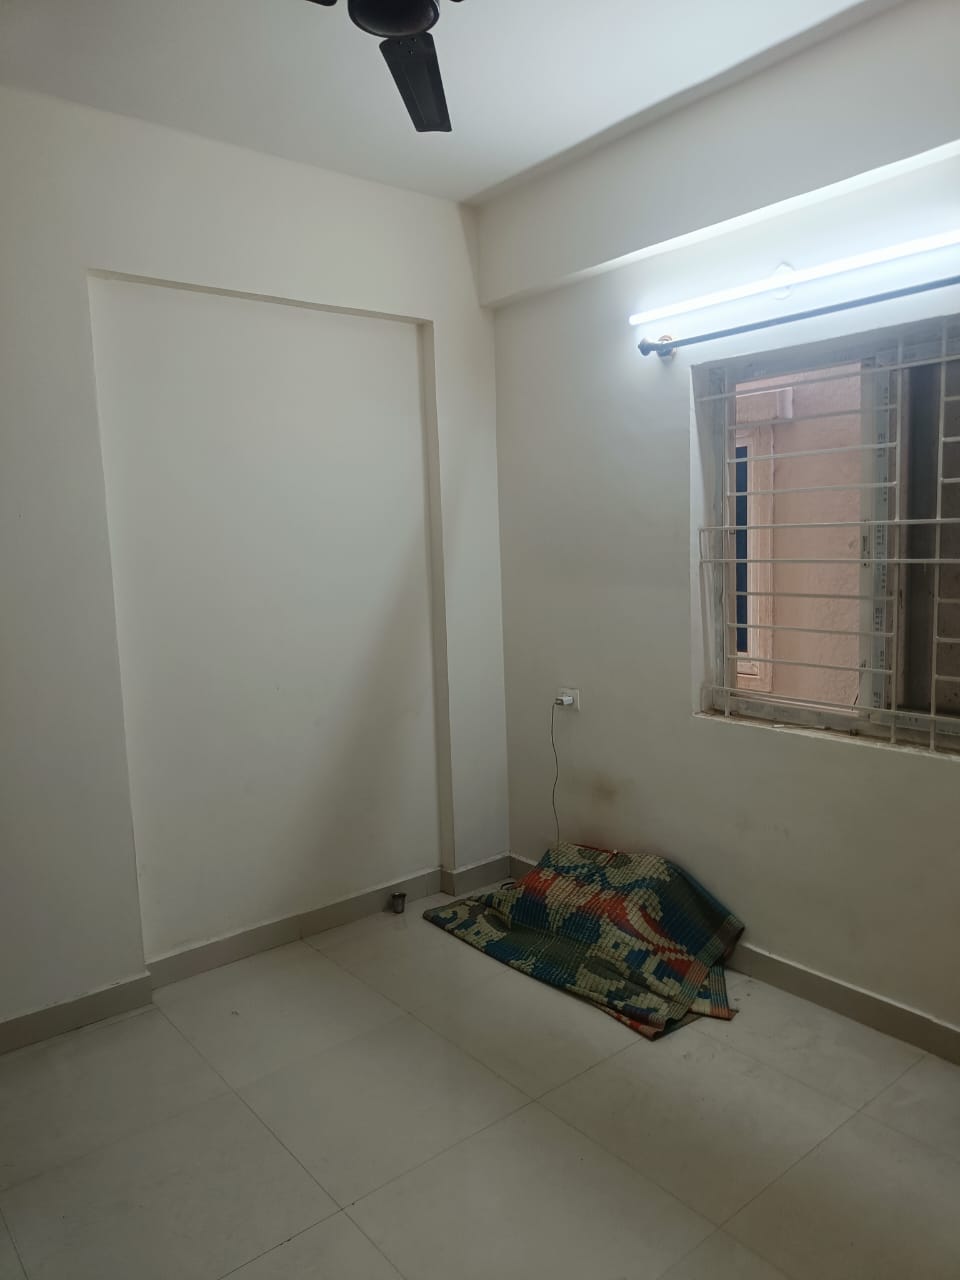 1 BHK Independent House for Lease Only at JAML2 - 2452 in Rajeev Nagar